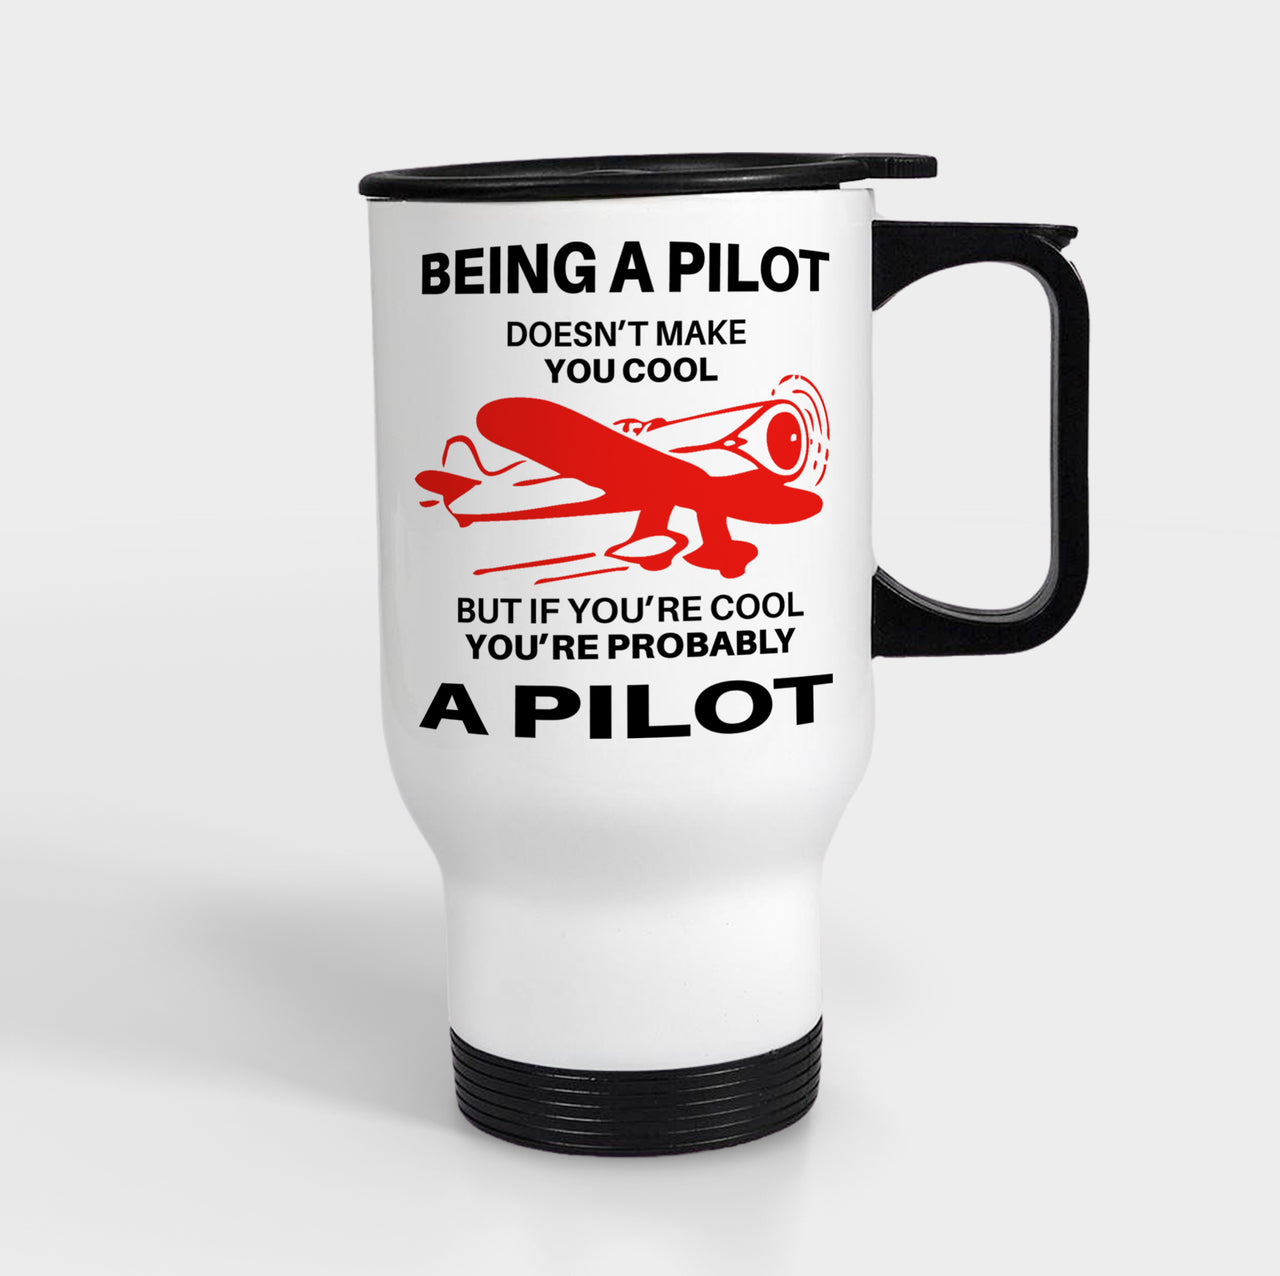 If You're Cool You're Probably a Pilot Designed Travel Mugs (With Holder)